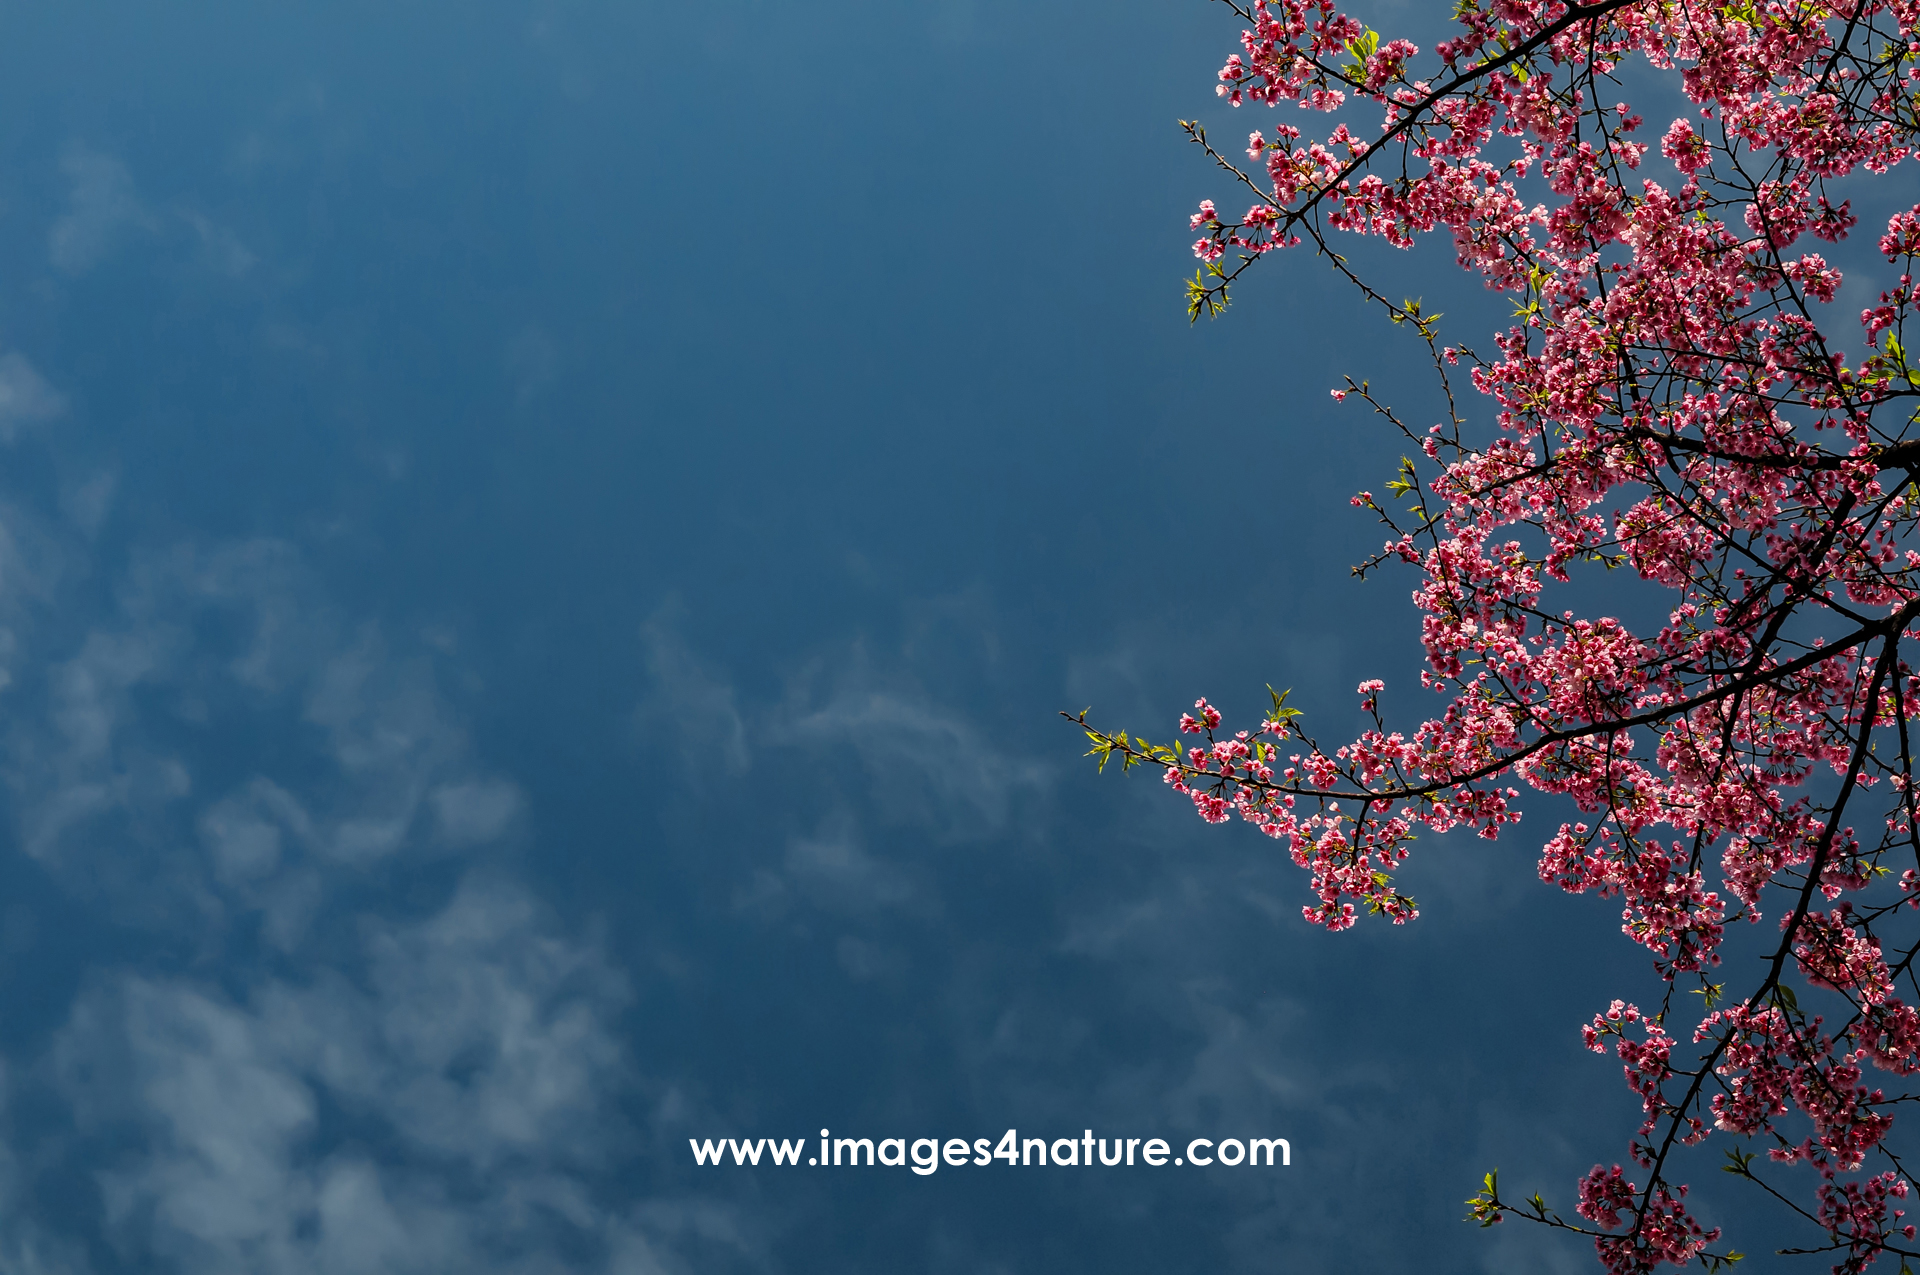 Blue sky with clouds with pink blooming cherry tree on the right